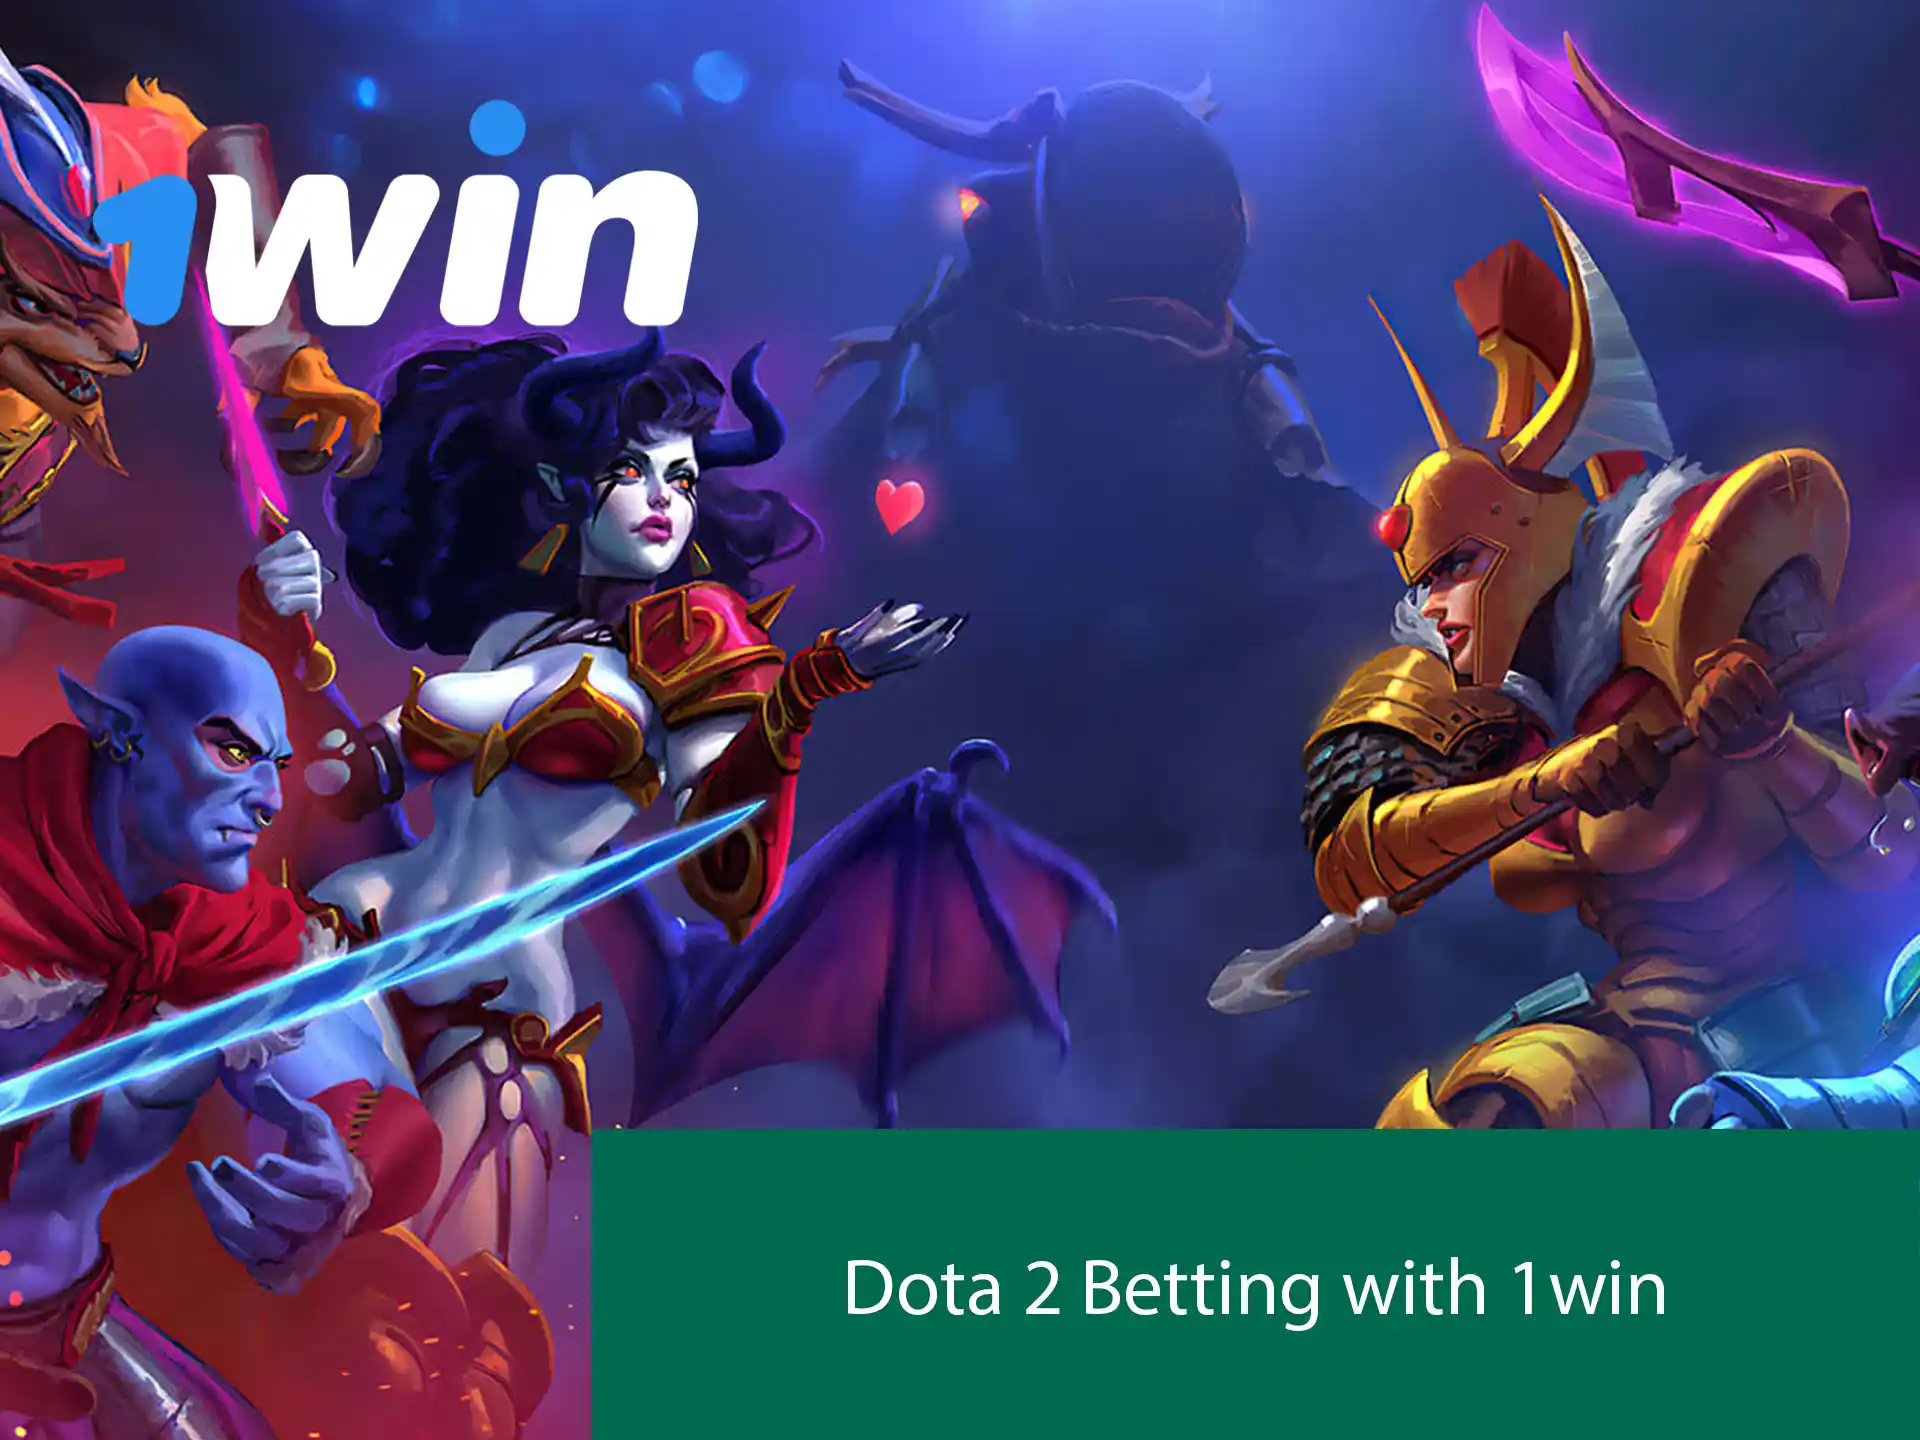 At least 10 outcomes for Dota betting at 1win.